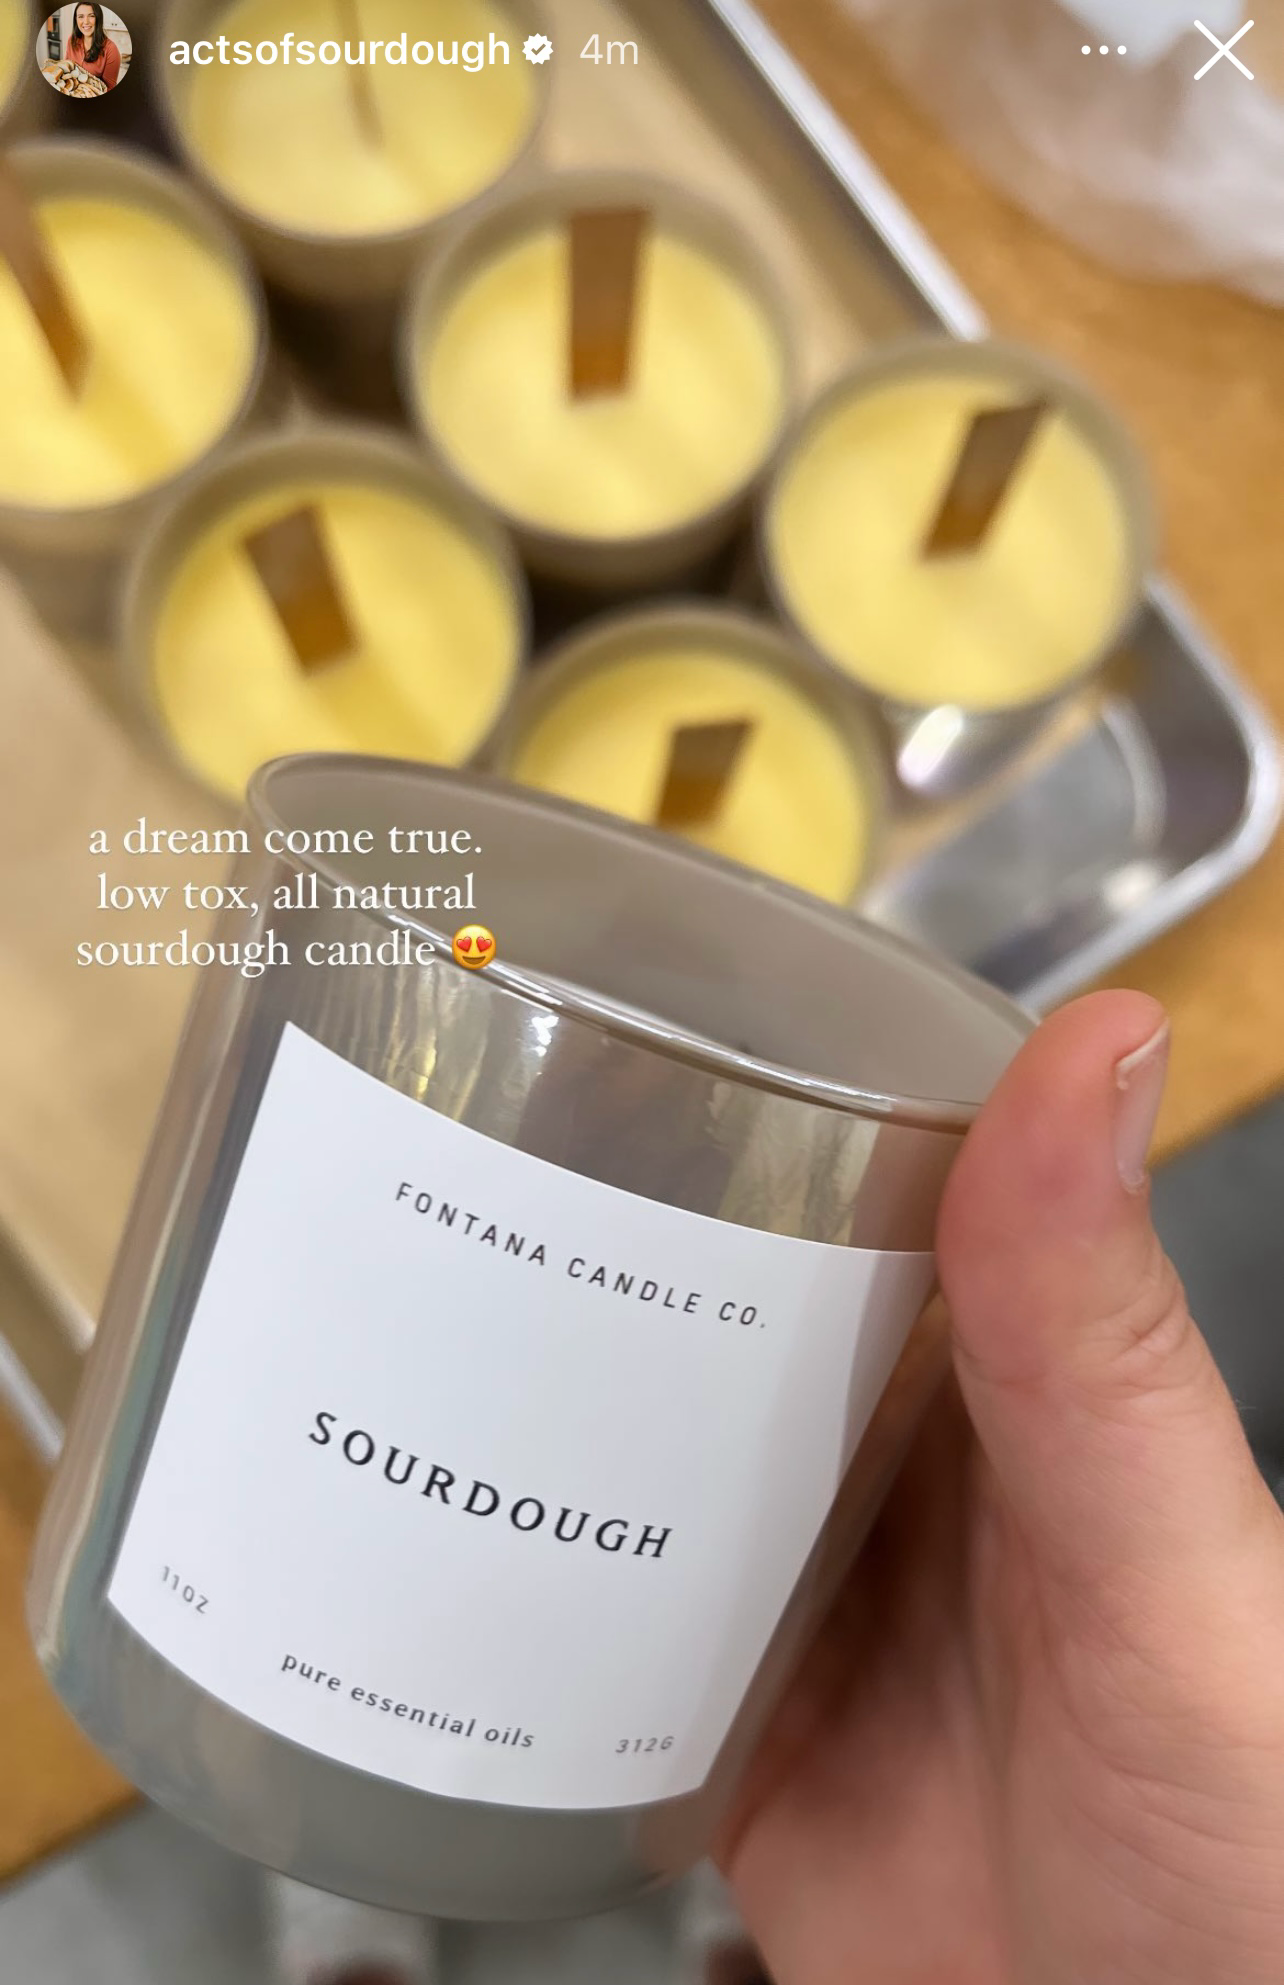 Acts of Sourdough x Fontana Collab Candle